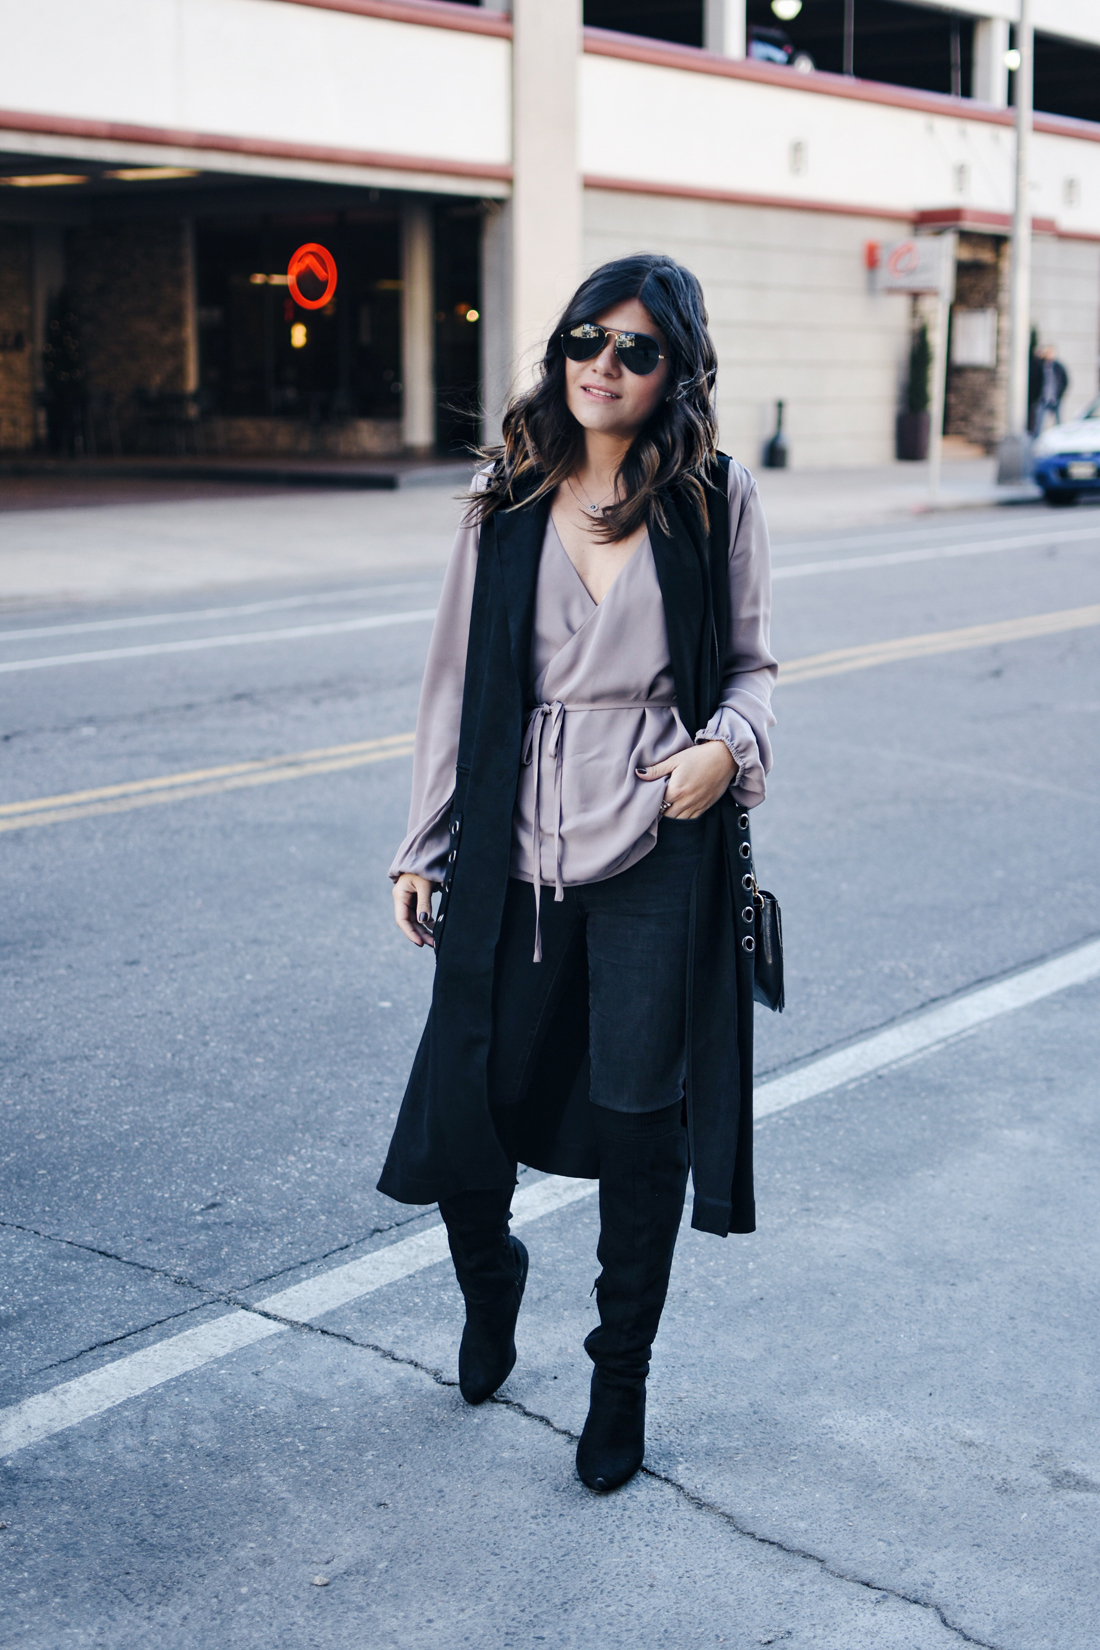 Carolina Hellal of Chic Talk wearing a VIPme black long vest, Forever21 top, Over the knee boots, and Rayban sunglasses